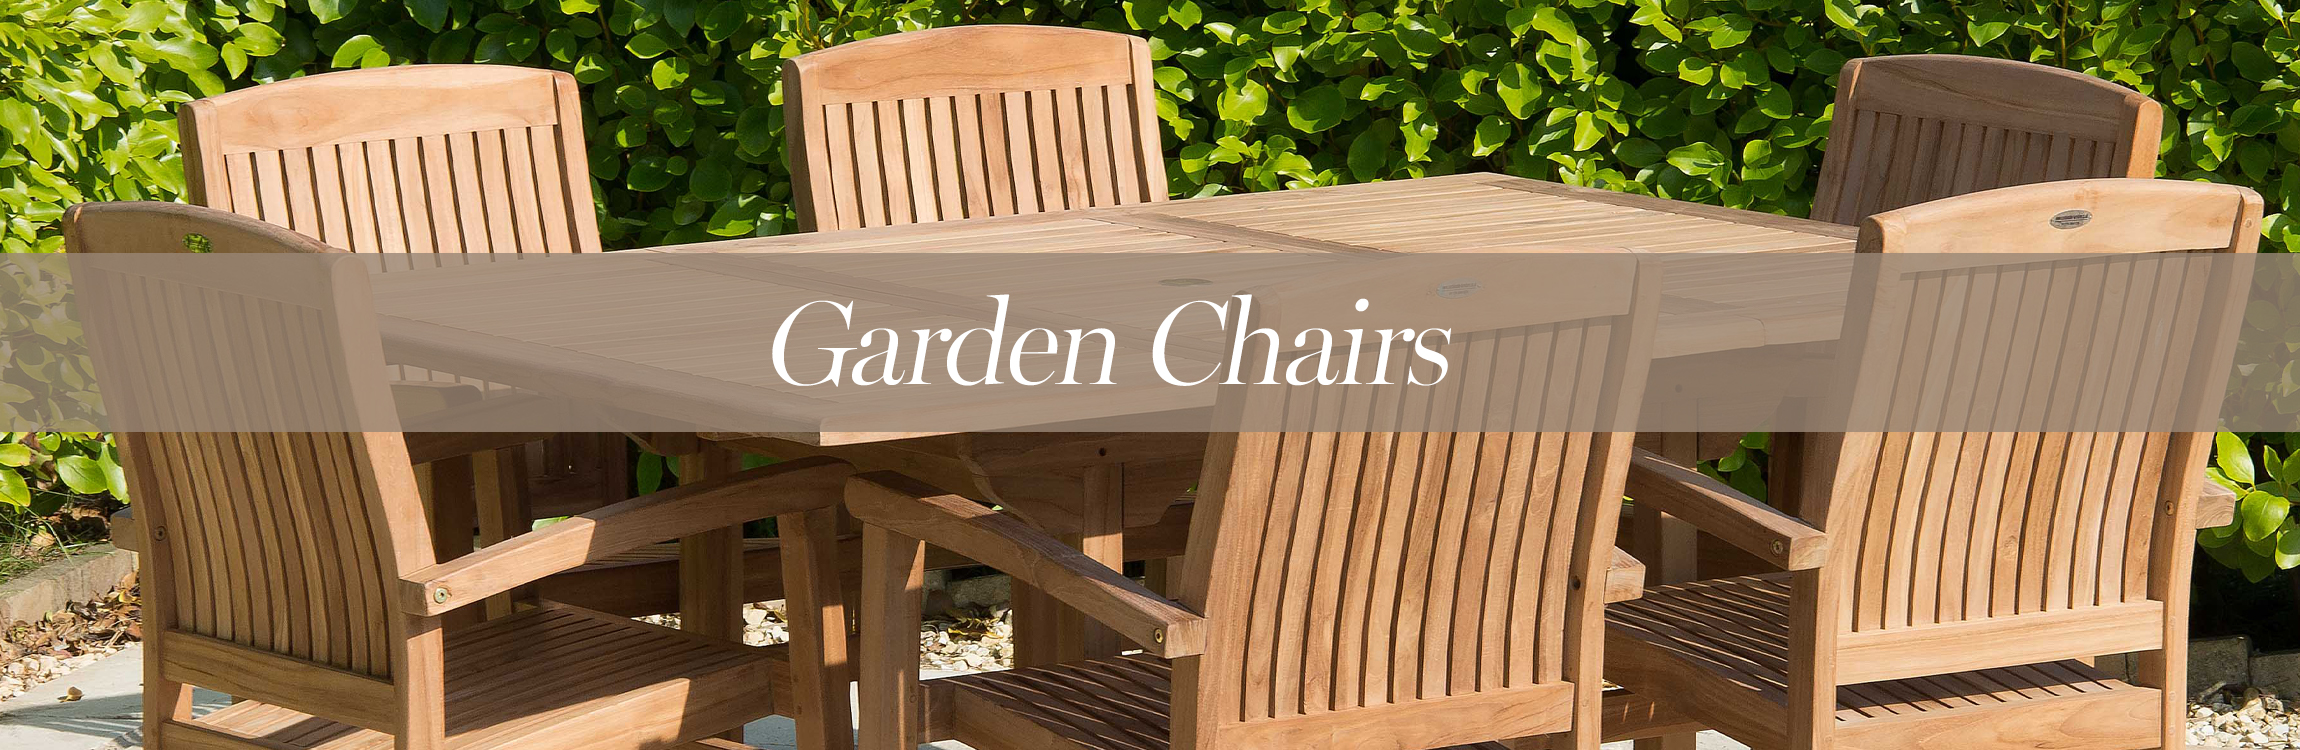 Garden Chair, Outdoor Folding Chairs, Fixed Garden Chair - Sustainable